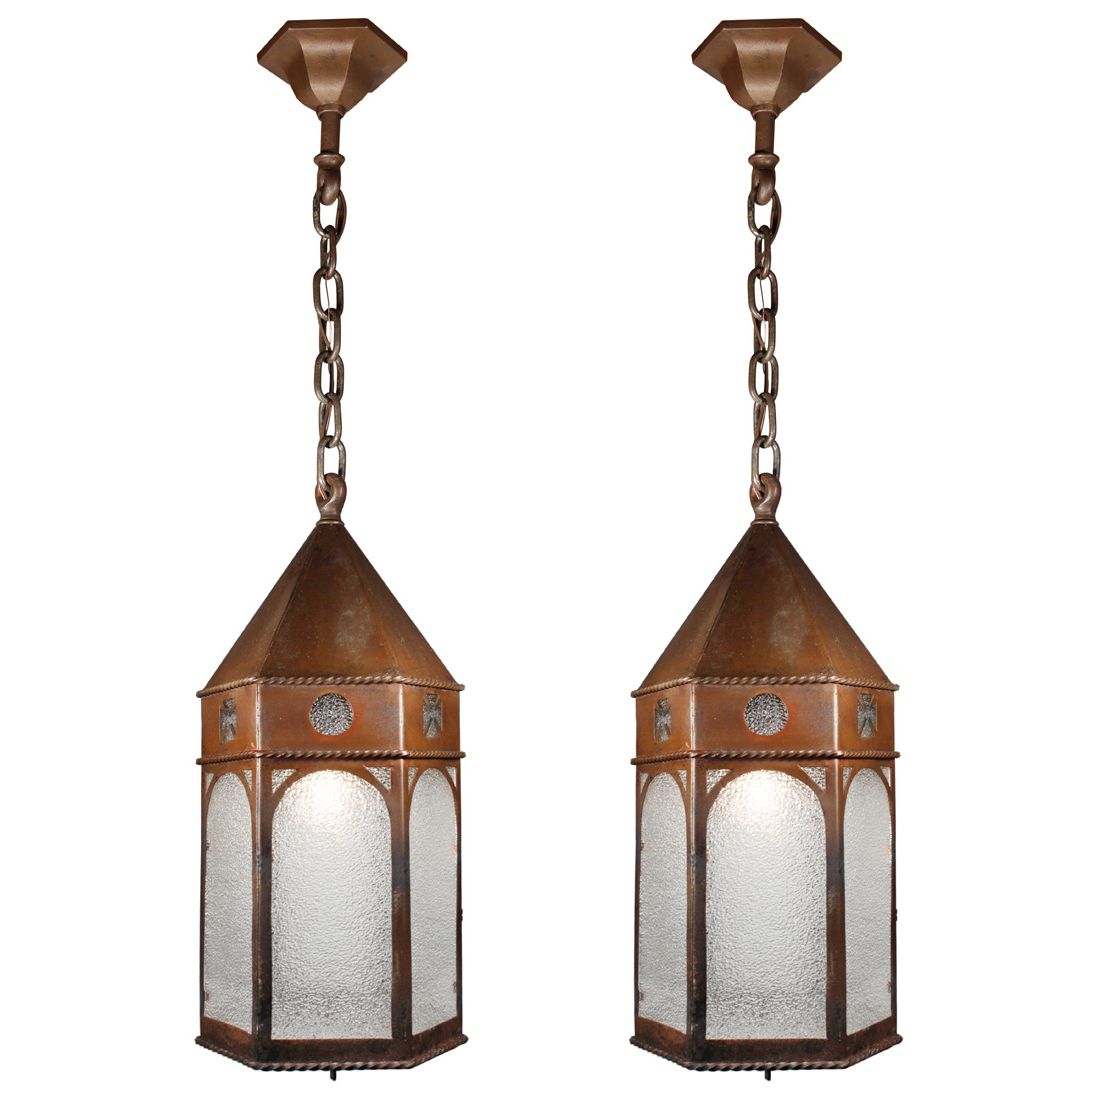 Matching Antique Bronze Lantern Pendant Lights With Granite Glass – Antique  Lighting, Ceiling, Ceiling Mounted, Exterior, Lanterns, Lighting,  Pair/multiple Chandeliers, Pendant Lighting, Recent Arrivals – The  Preservation Station Within Well Known Bronze Lantern Chandeliers (View 5 of 10)